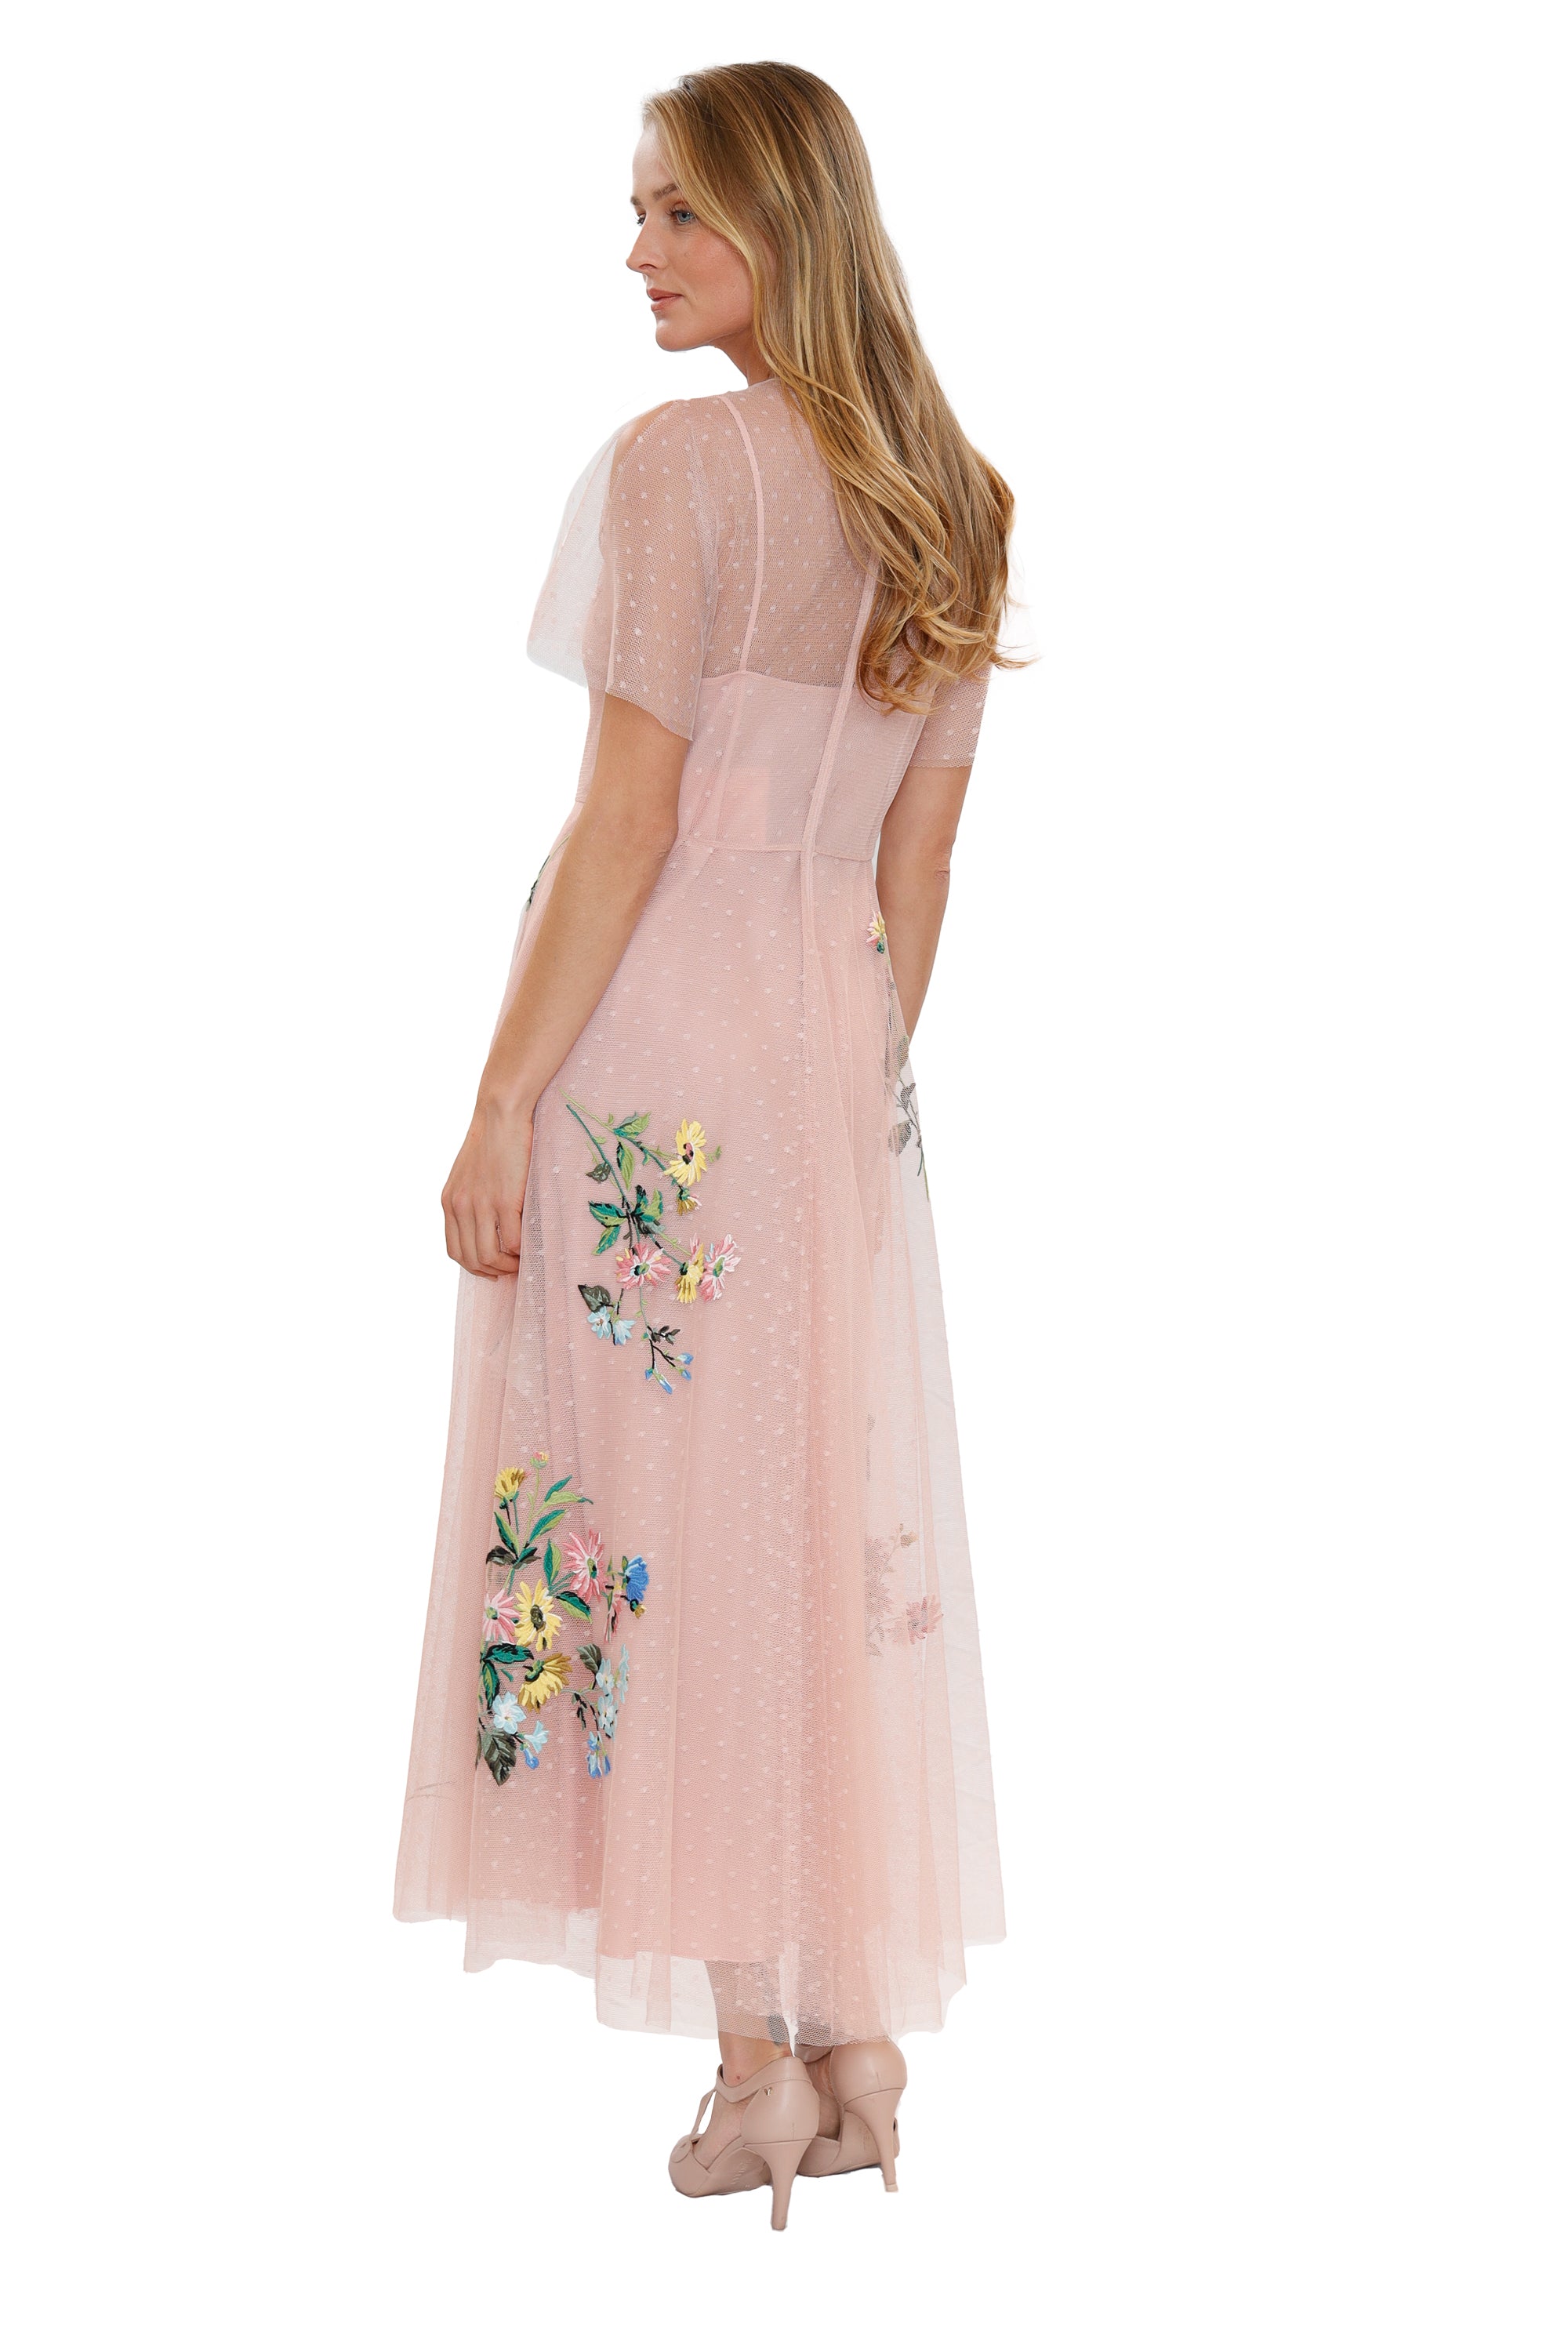 Floral Pink Dress - Red Valentino